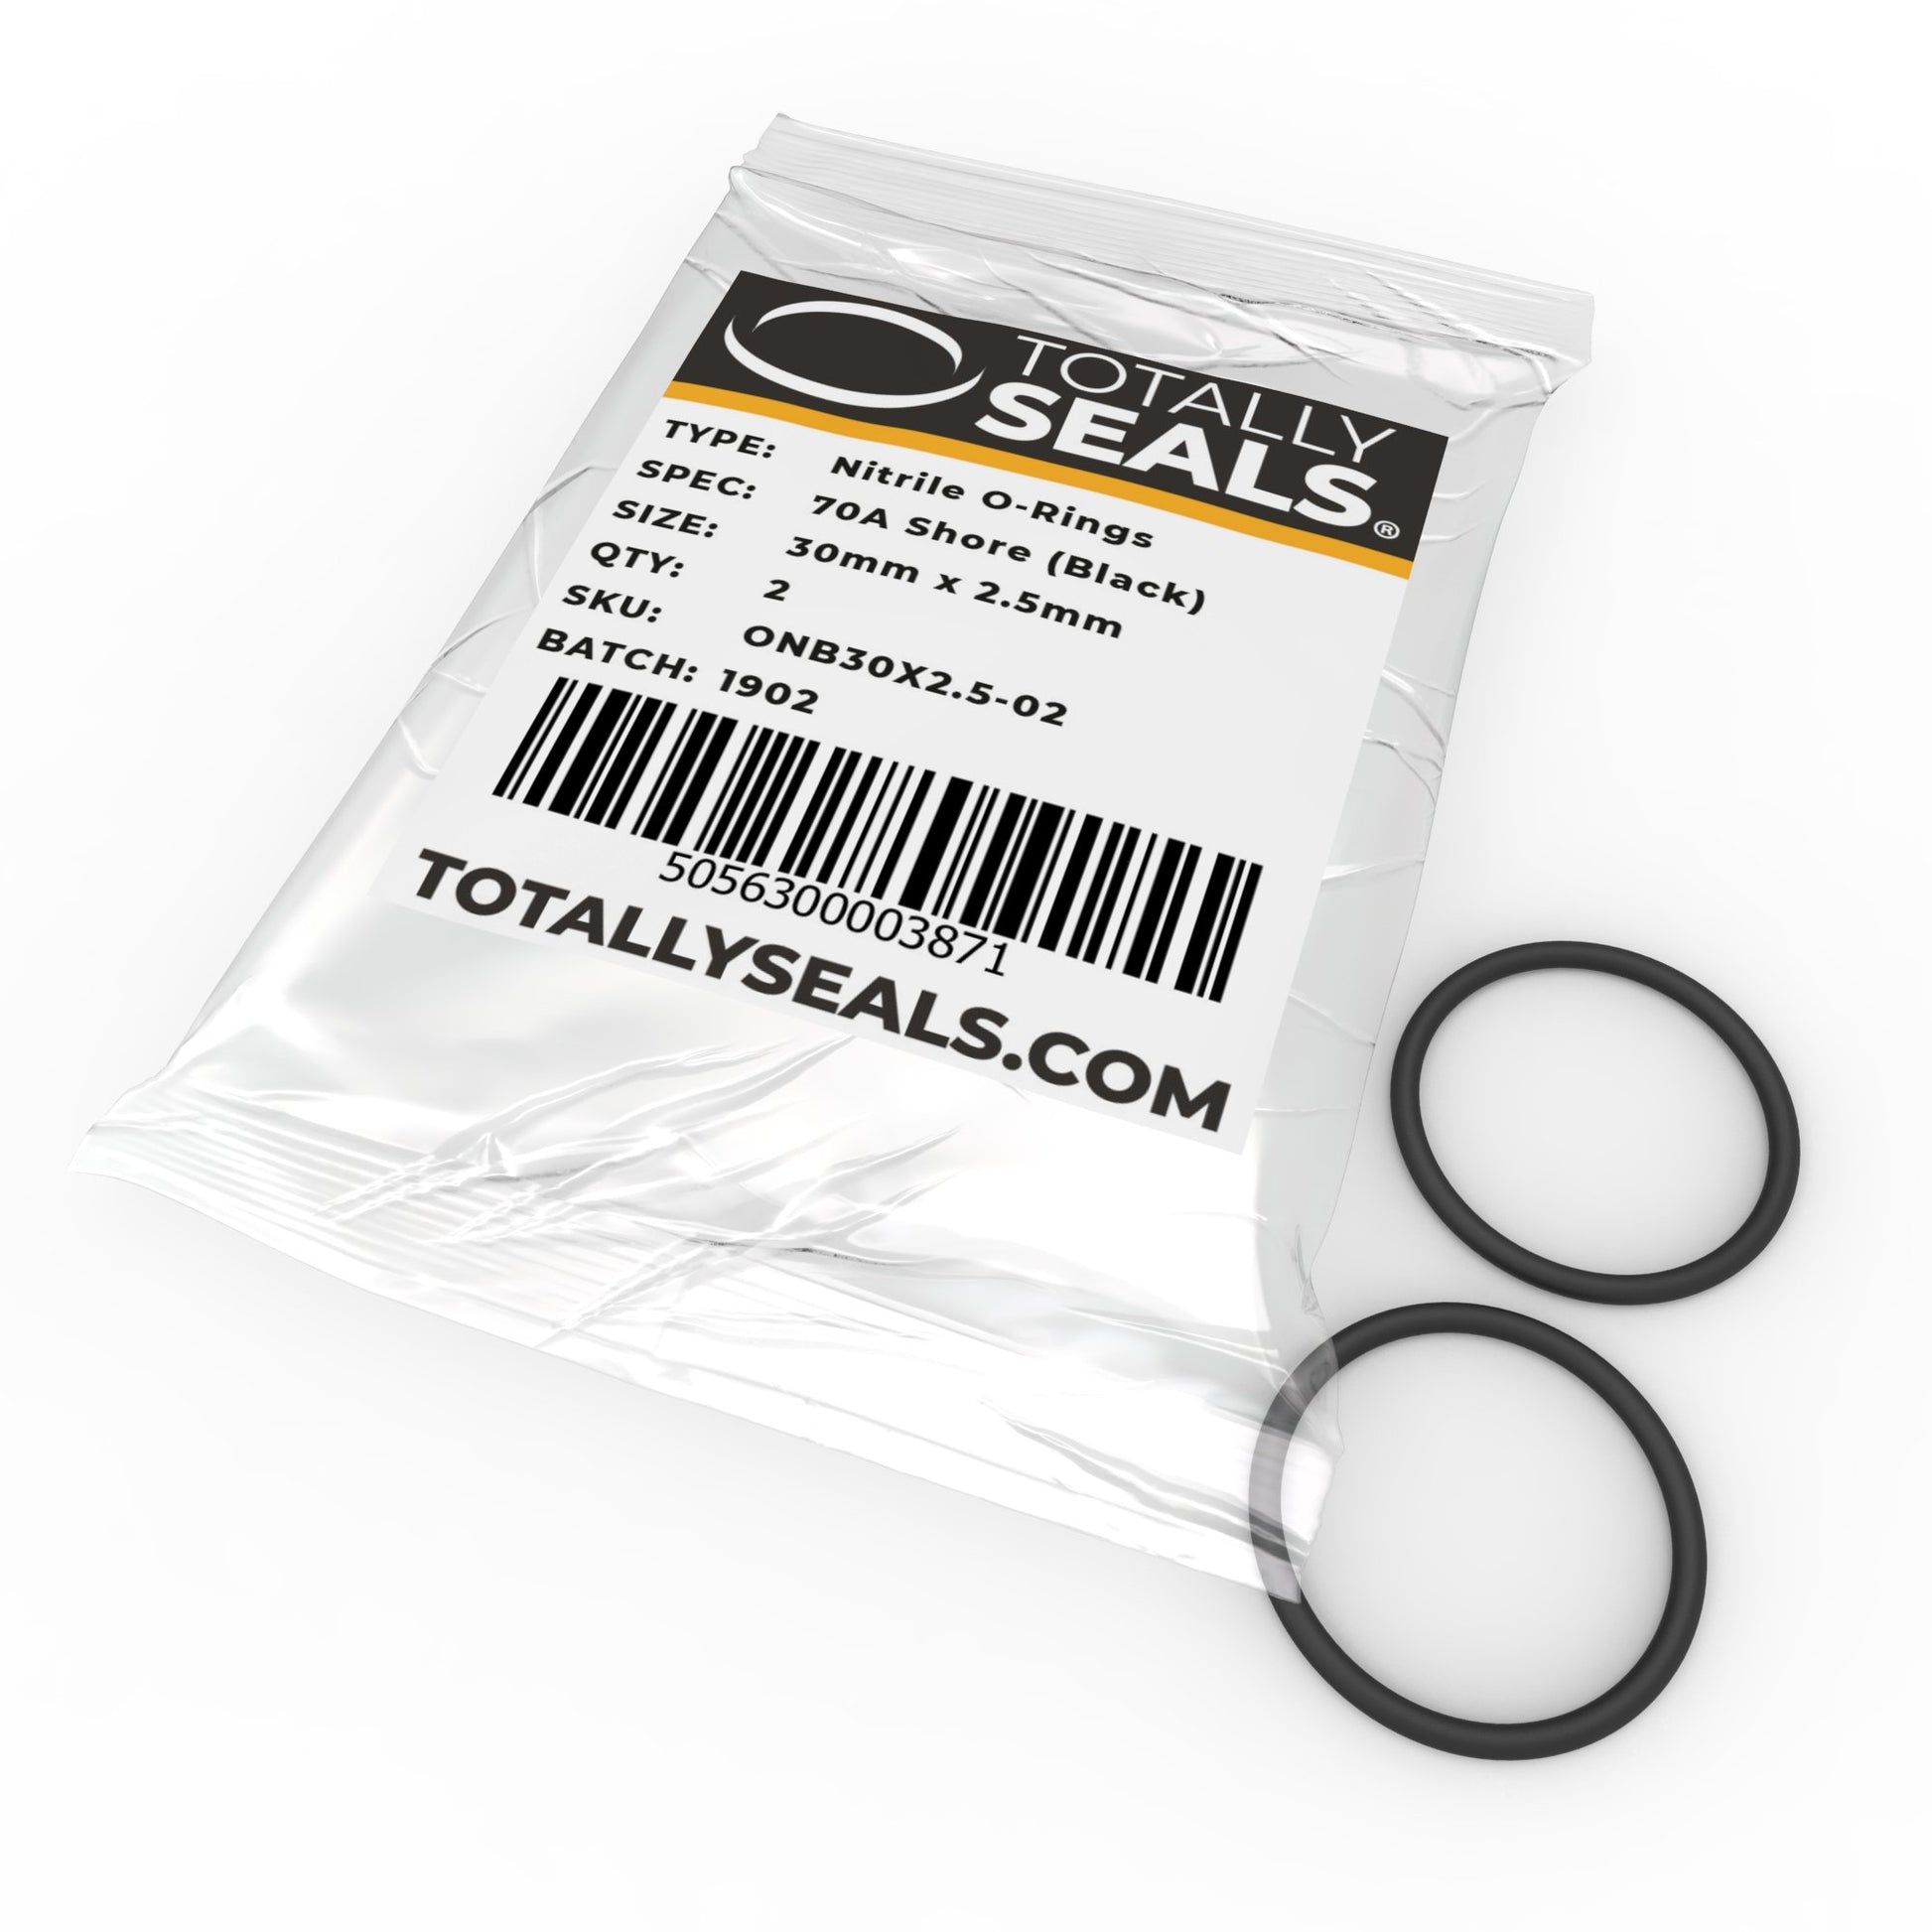 30mm x 2.5mm (35mm OD) Nitrile O-Rings - Totally Seals®